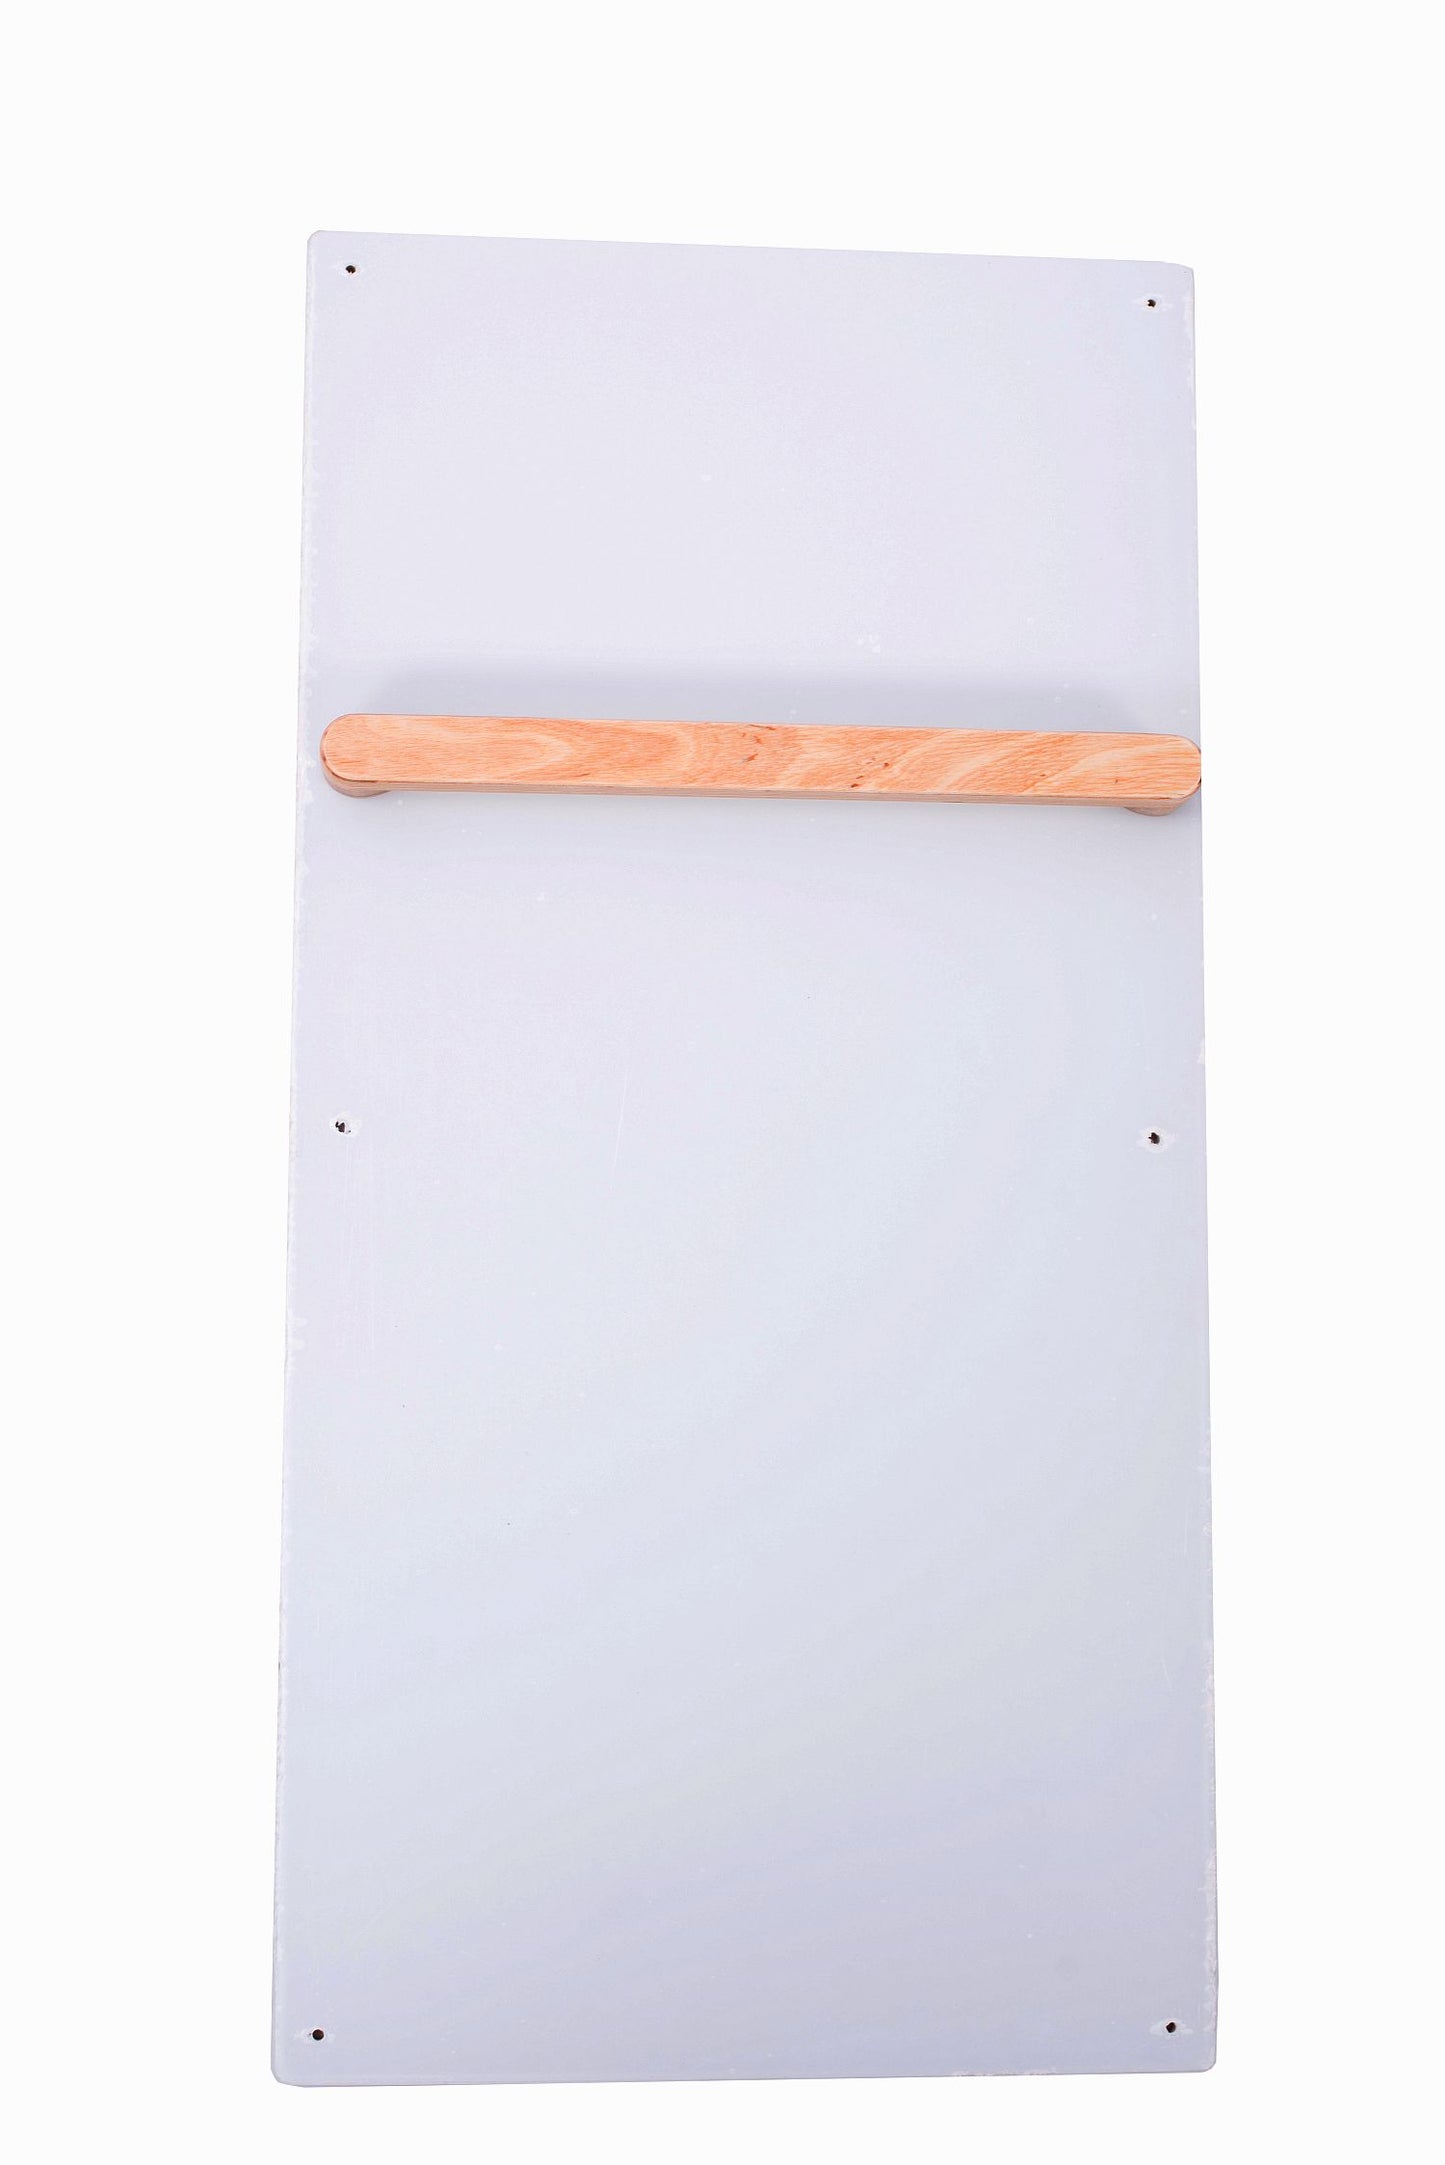 Montessori Mirror With Pull-Up Bar Slim/M - Leea's Tower Accessoire